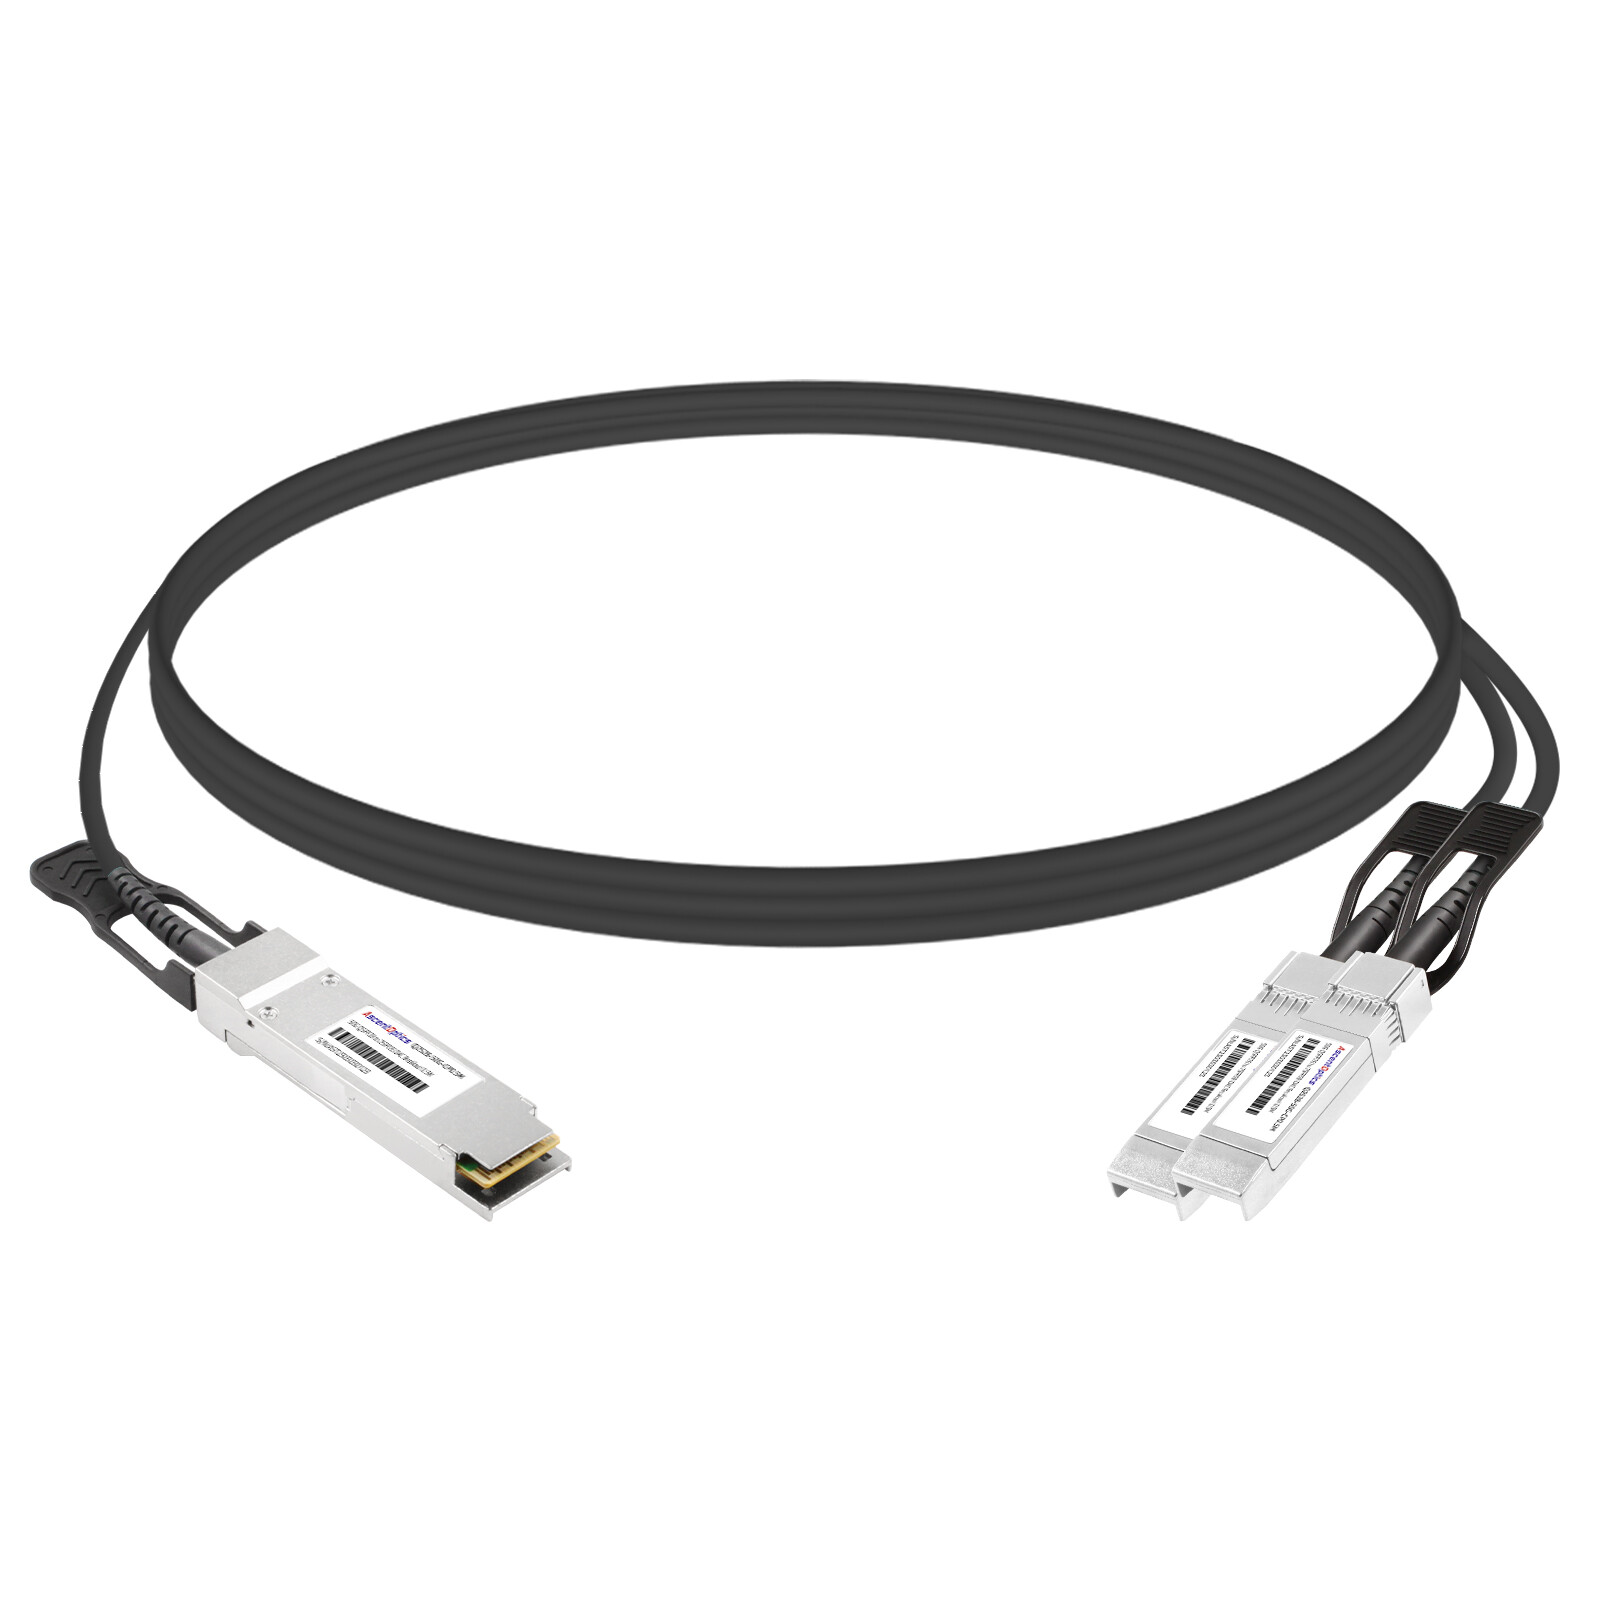 50G DSFP to 2x 25G SFP28 Copper Breakout Cable,1 Meter,Passive